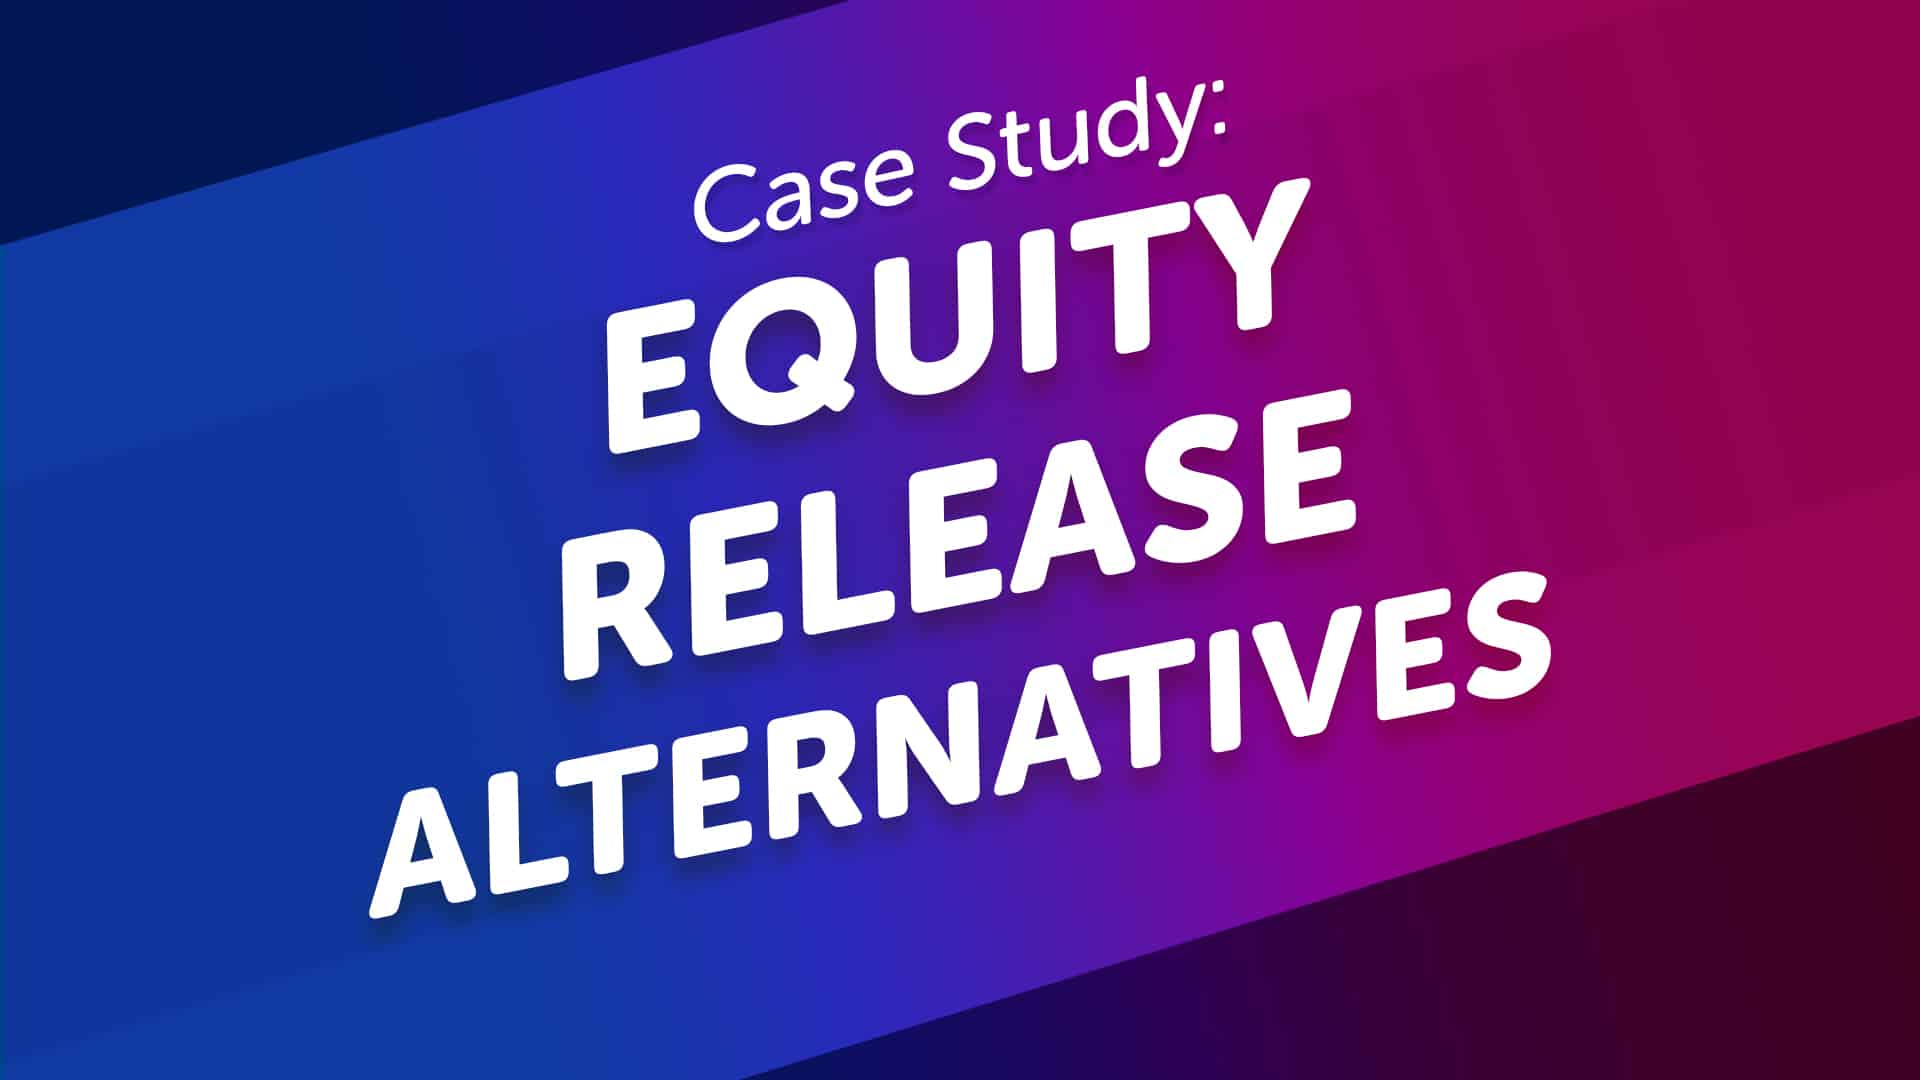 Are There any Alternatives to Equity Release?